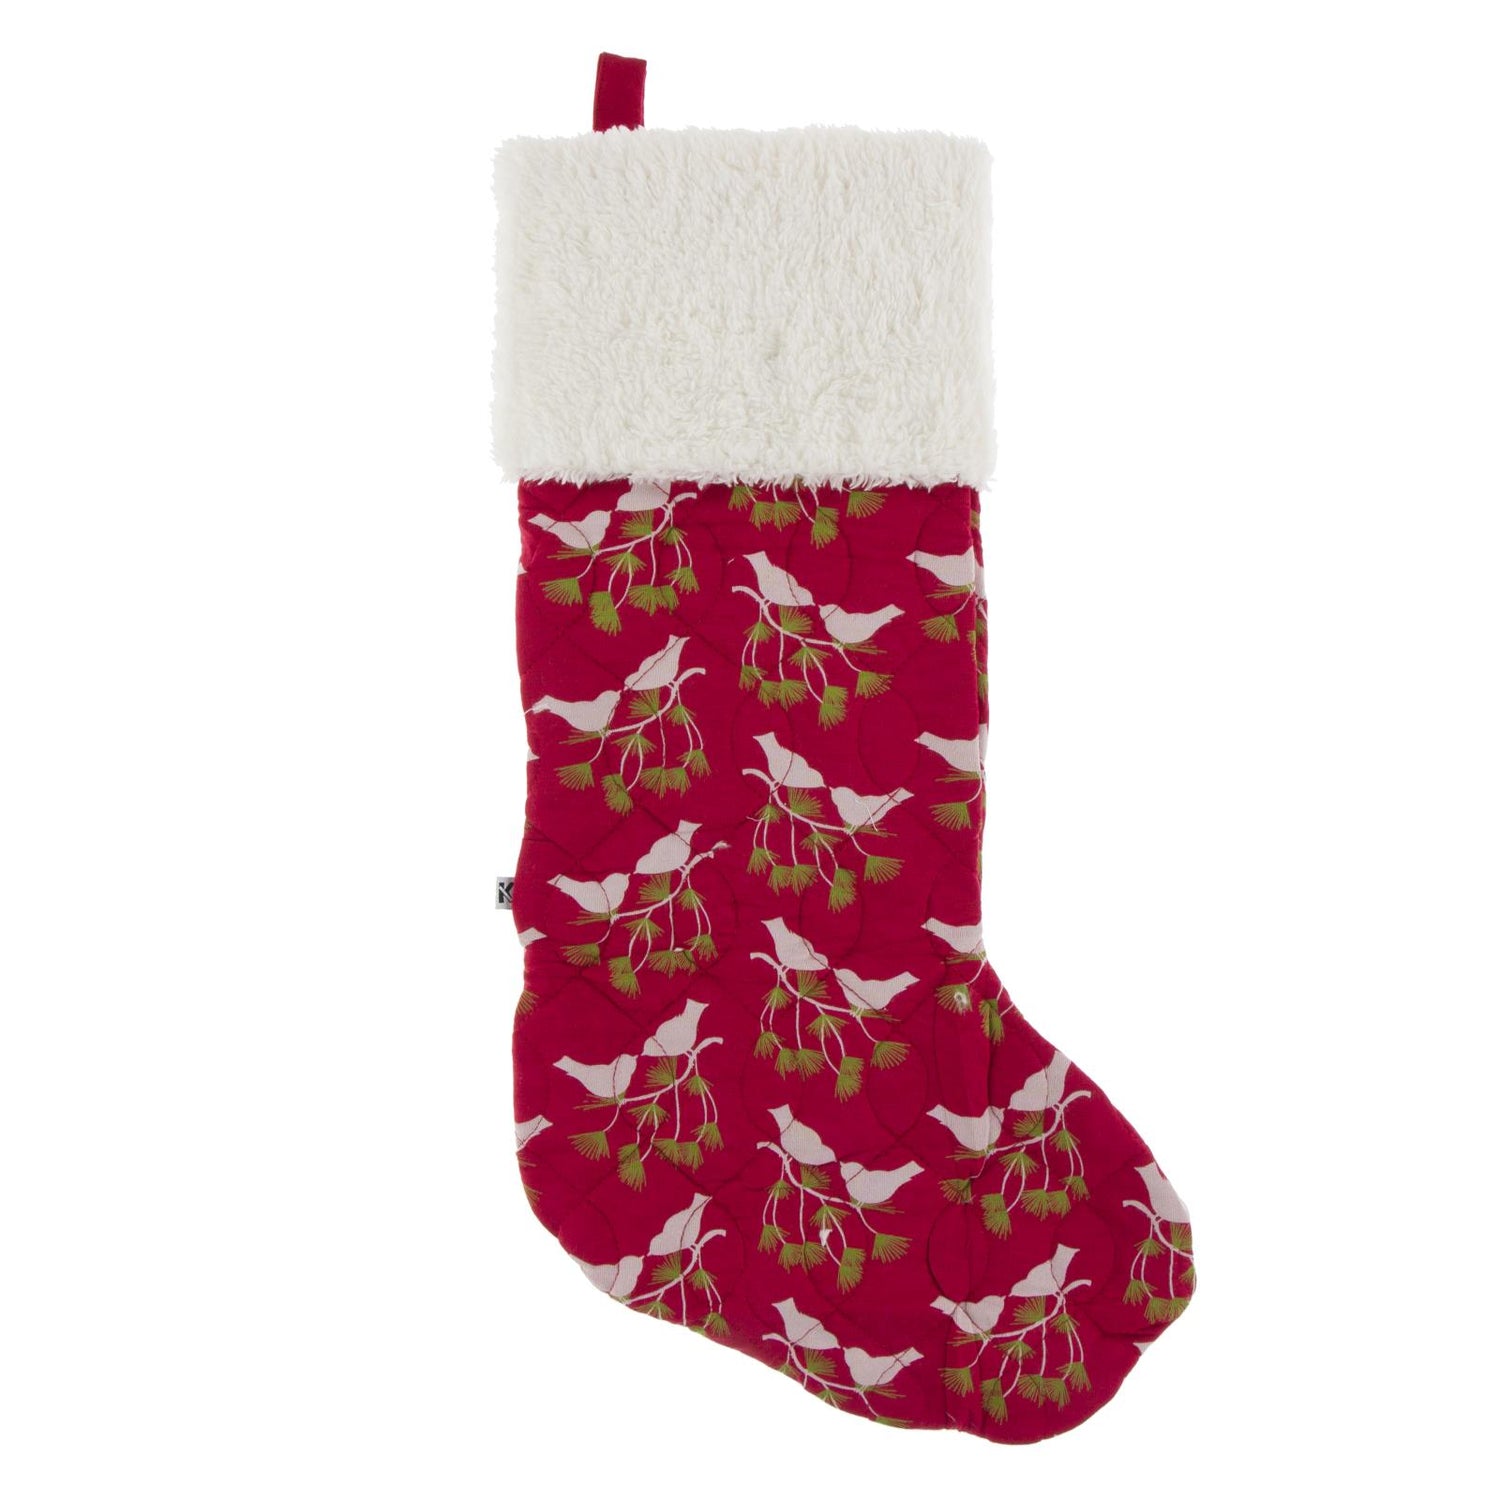 Print Quilted Stocking in Crimson Kissing Birds/2020 Candy Cane Stripe